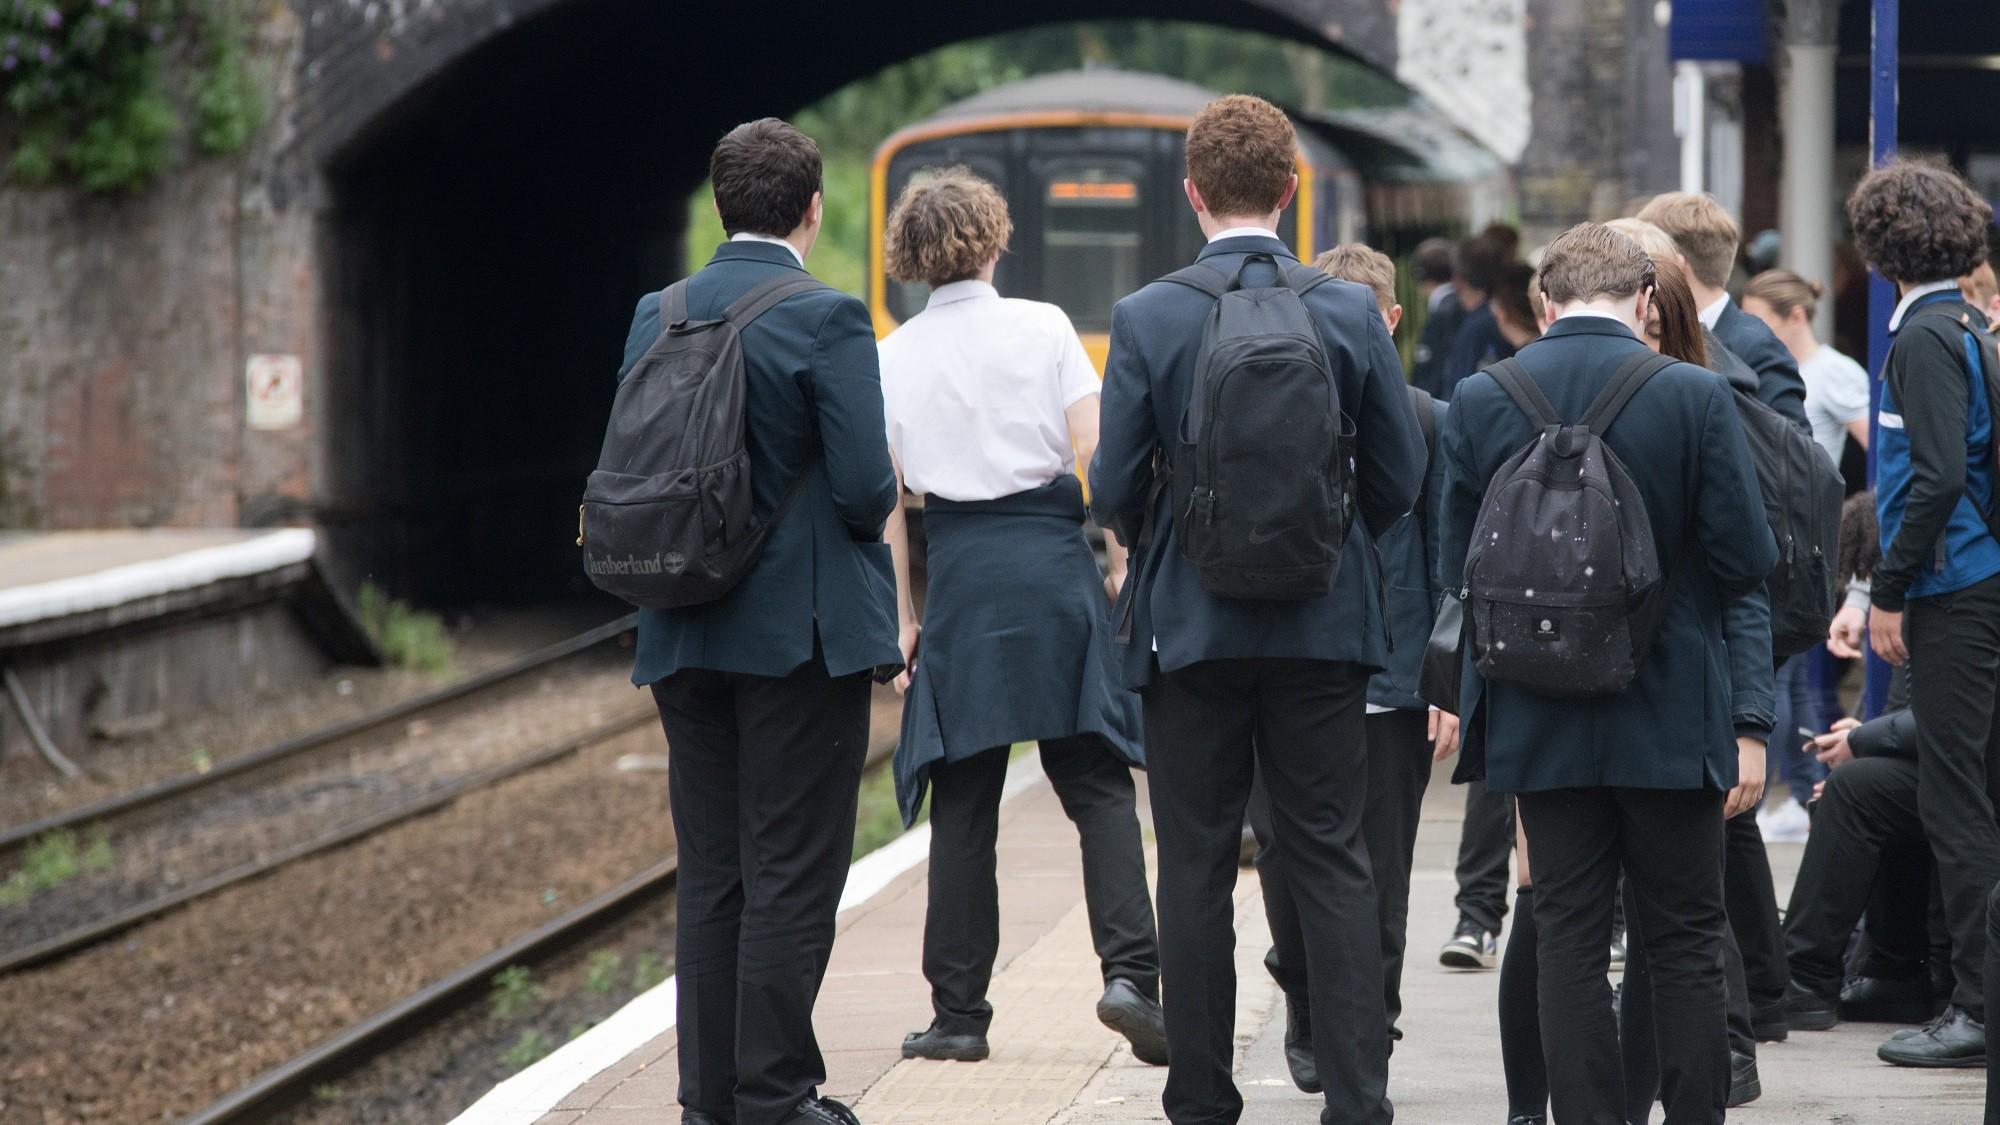 Image shows schoolchildren waiting arrival of a Northern service